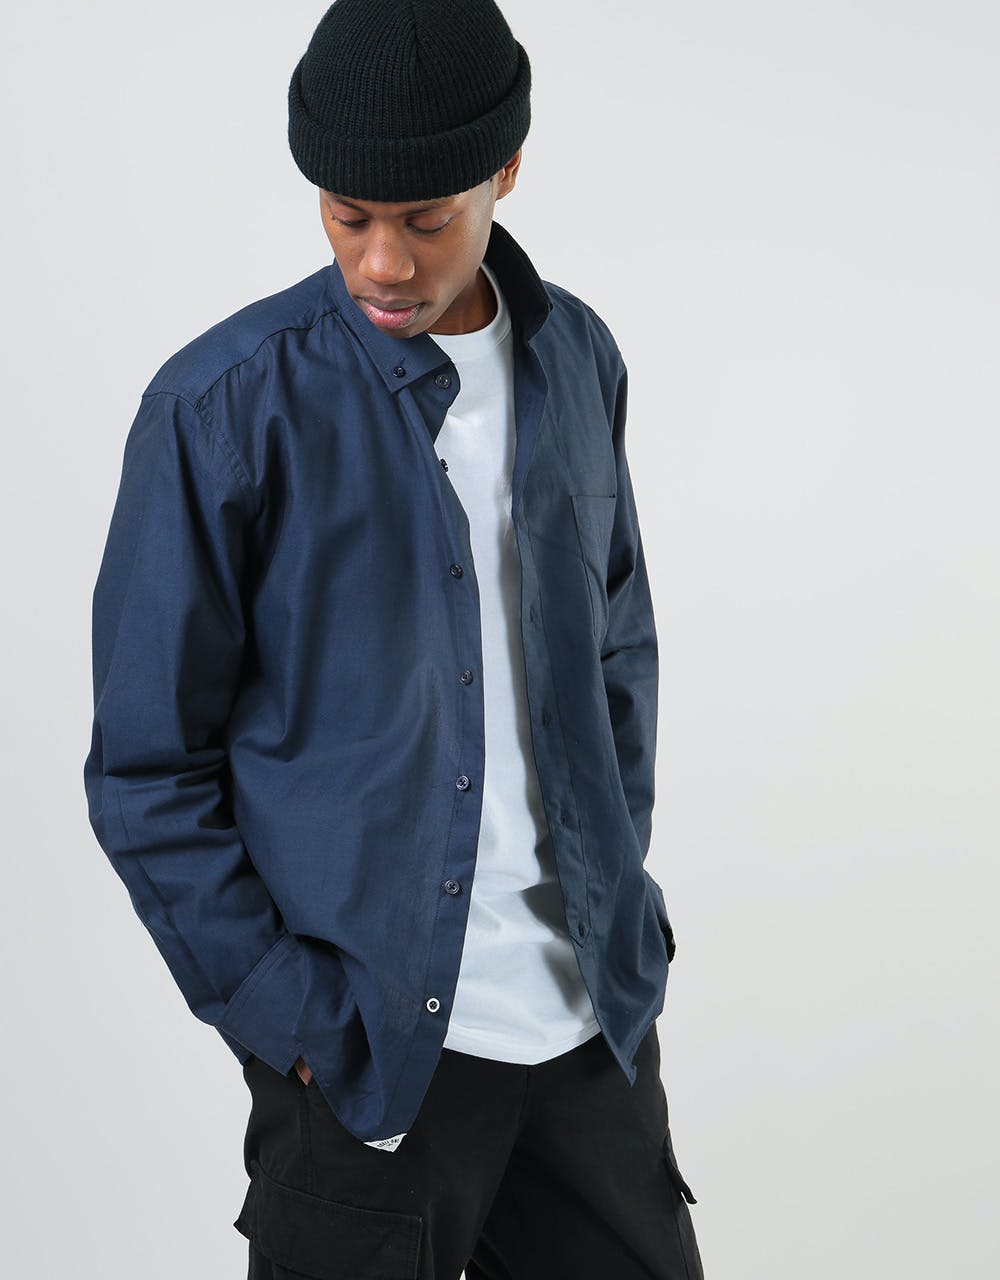 Route One Oxford Shirt - Navy